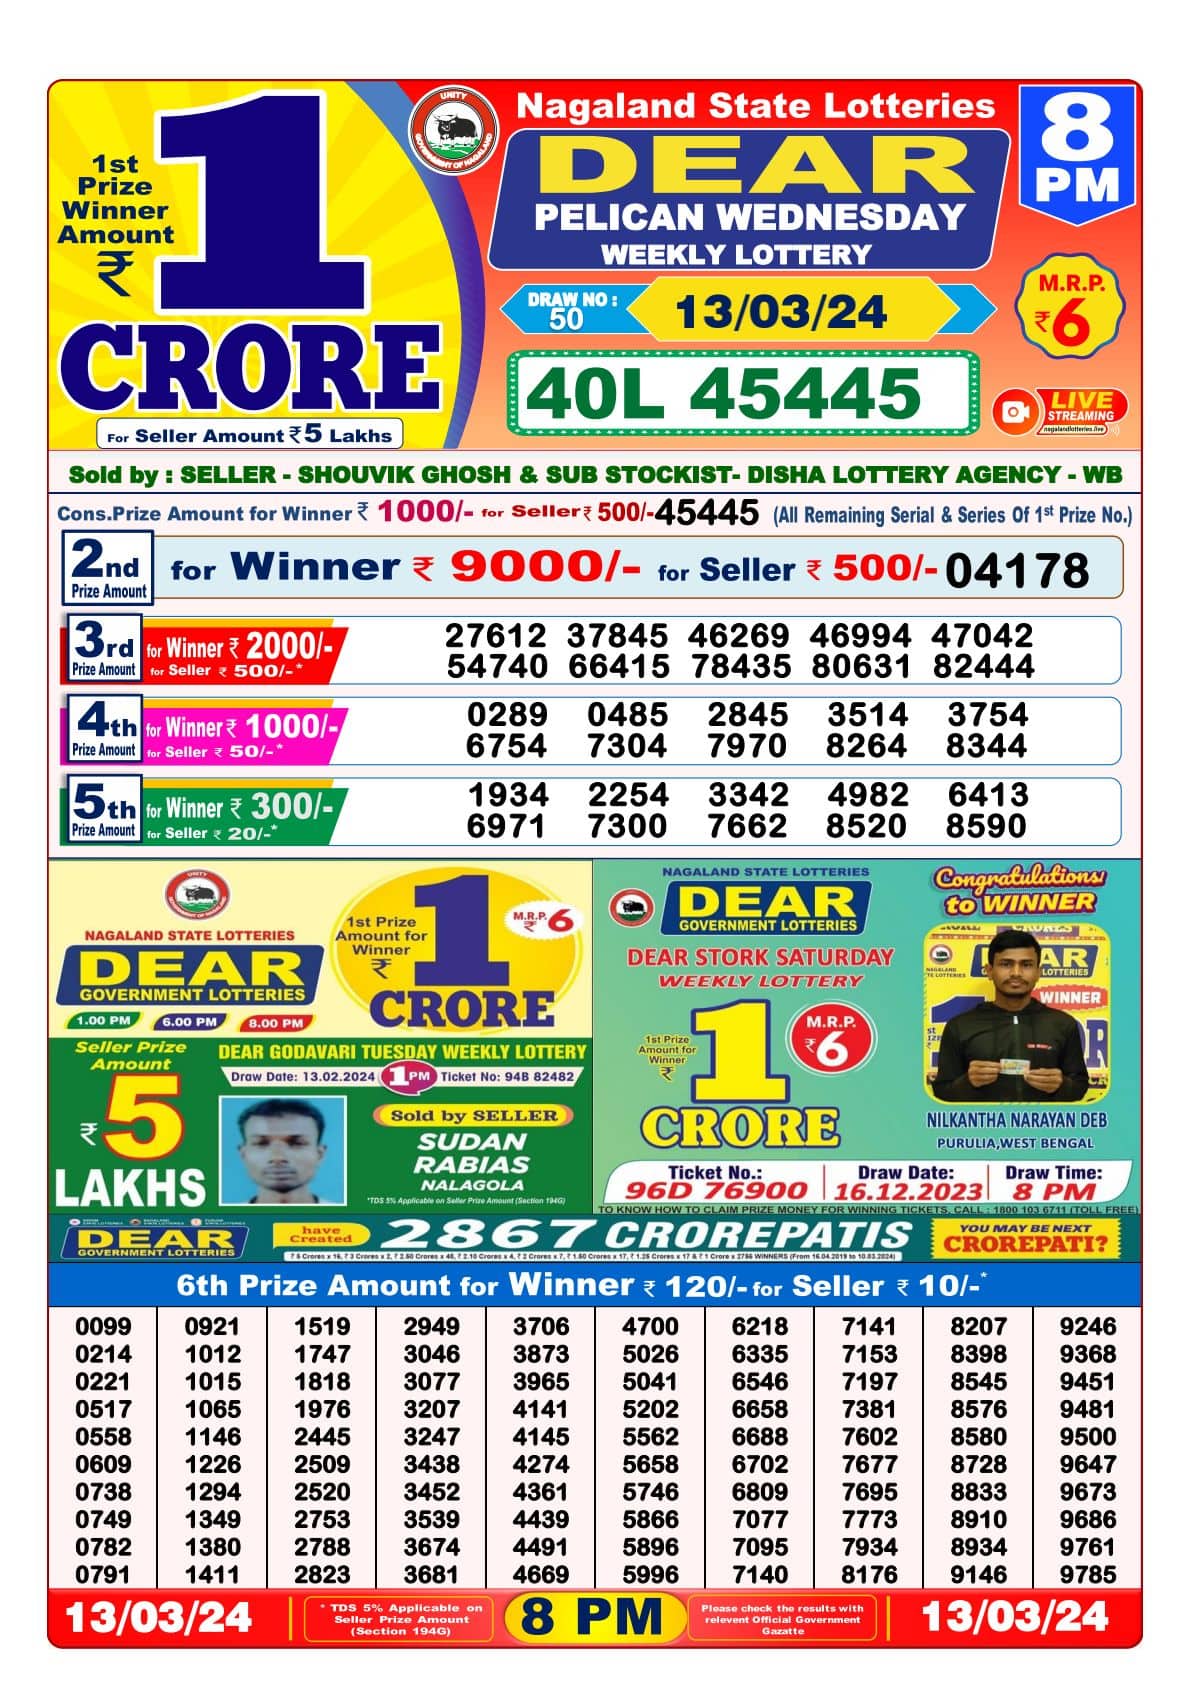 LIVE LOTTERY SAMBAD DEAR MORNING 1:00 PM RESULT 22.07.2022 | NAGALAND STATE  DEAR LOTTERY LIVE DRAW | video recording, Nagaland | LOTTERY LUCKY NUMBER lottery  live dear evening lottery sambad live nagaland